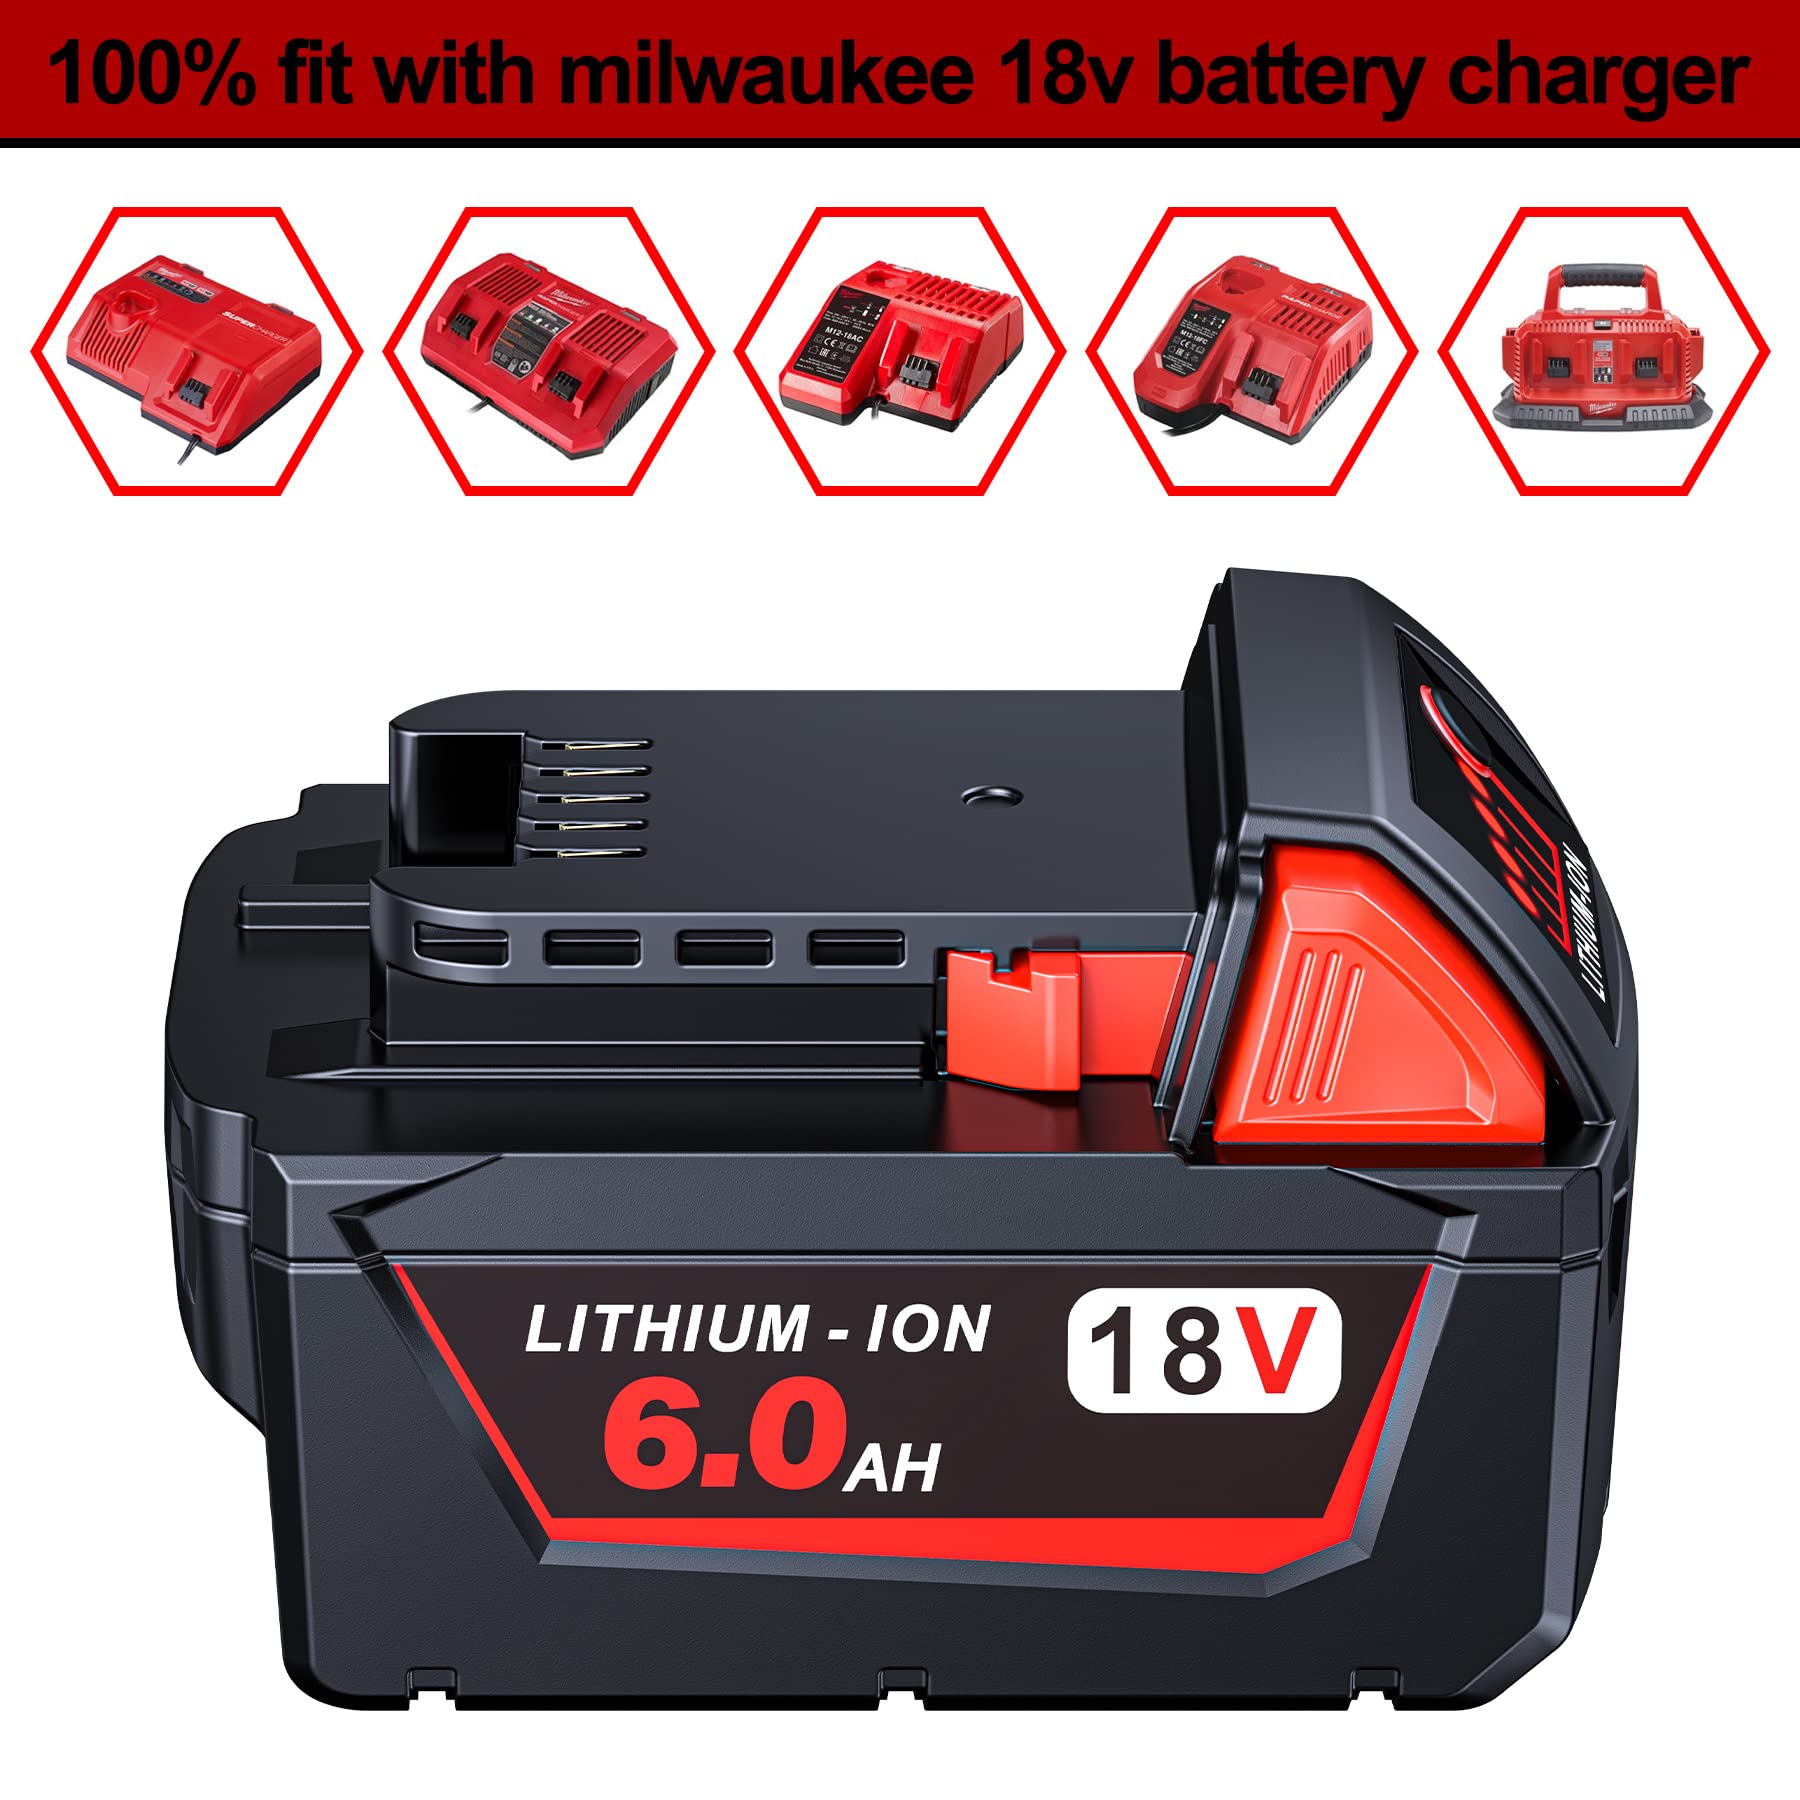 LONG FIT 2 Pack | Replace for Milwaukee M18 Battery 6.0Ah, Perfectly Compatible with Milwaukee Original Charger (48-11-1850)